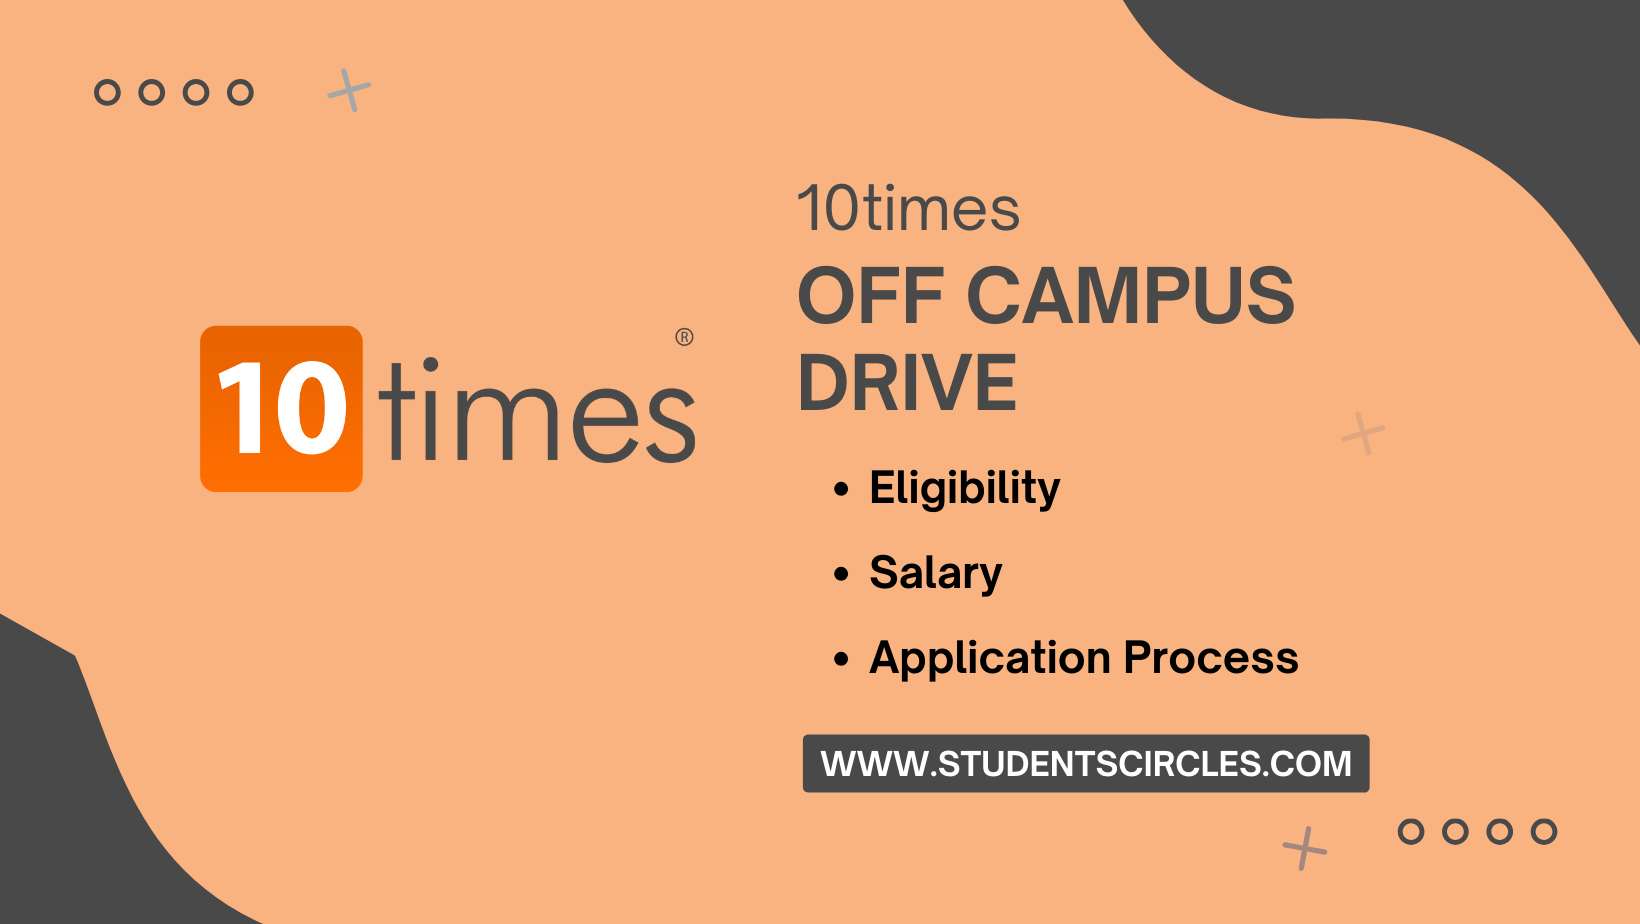 10times Off Campus Drive